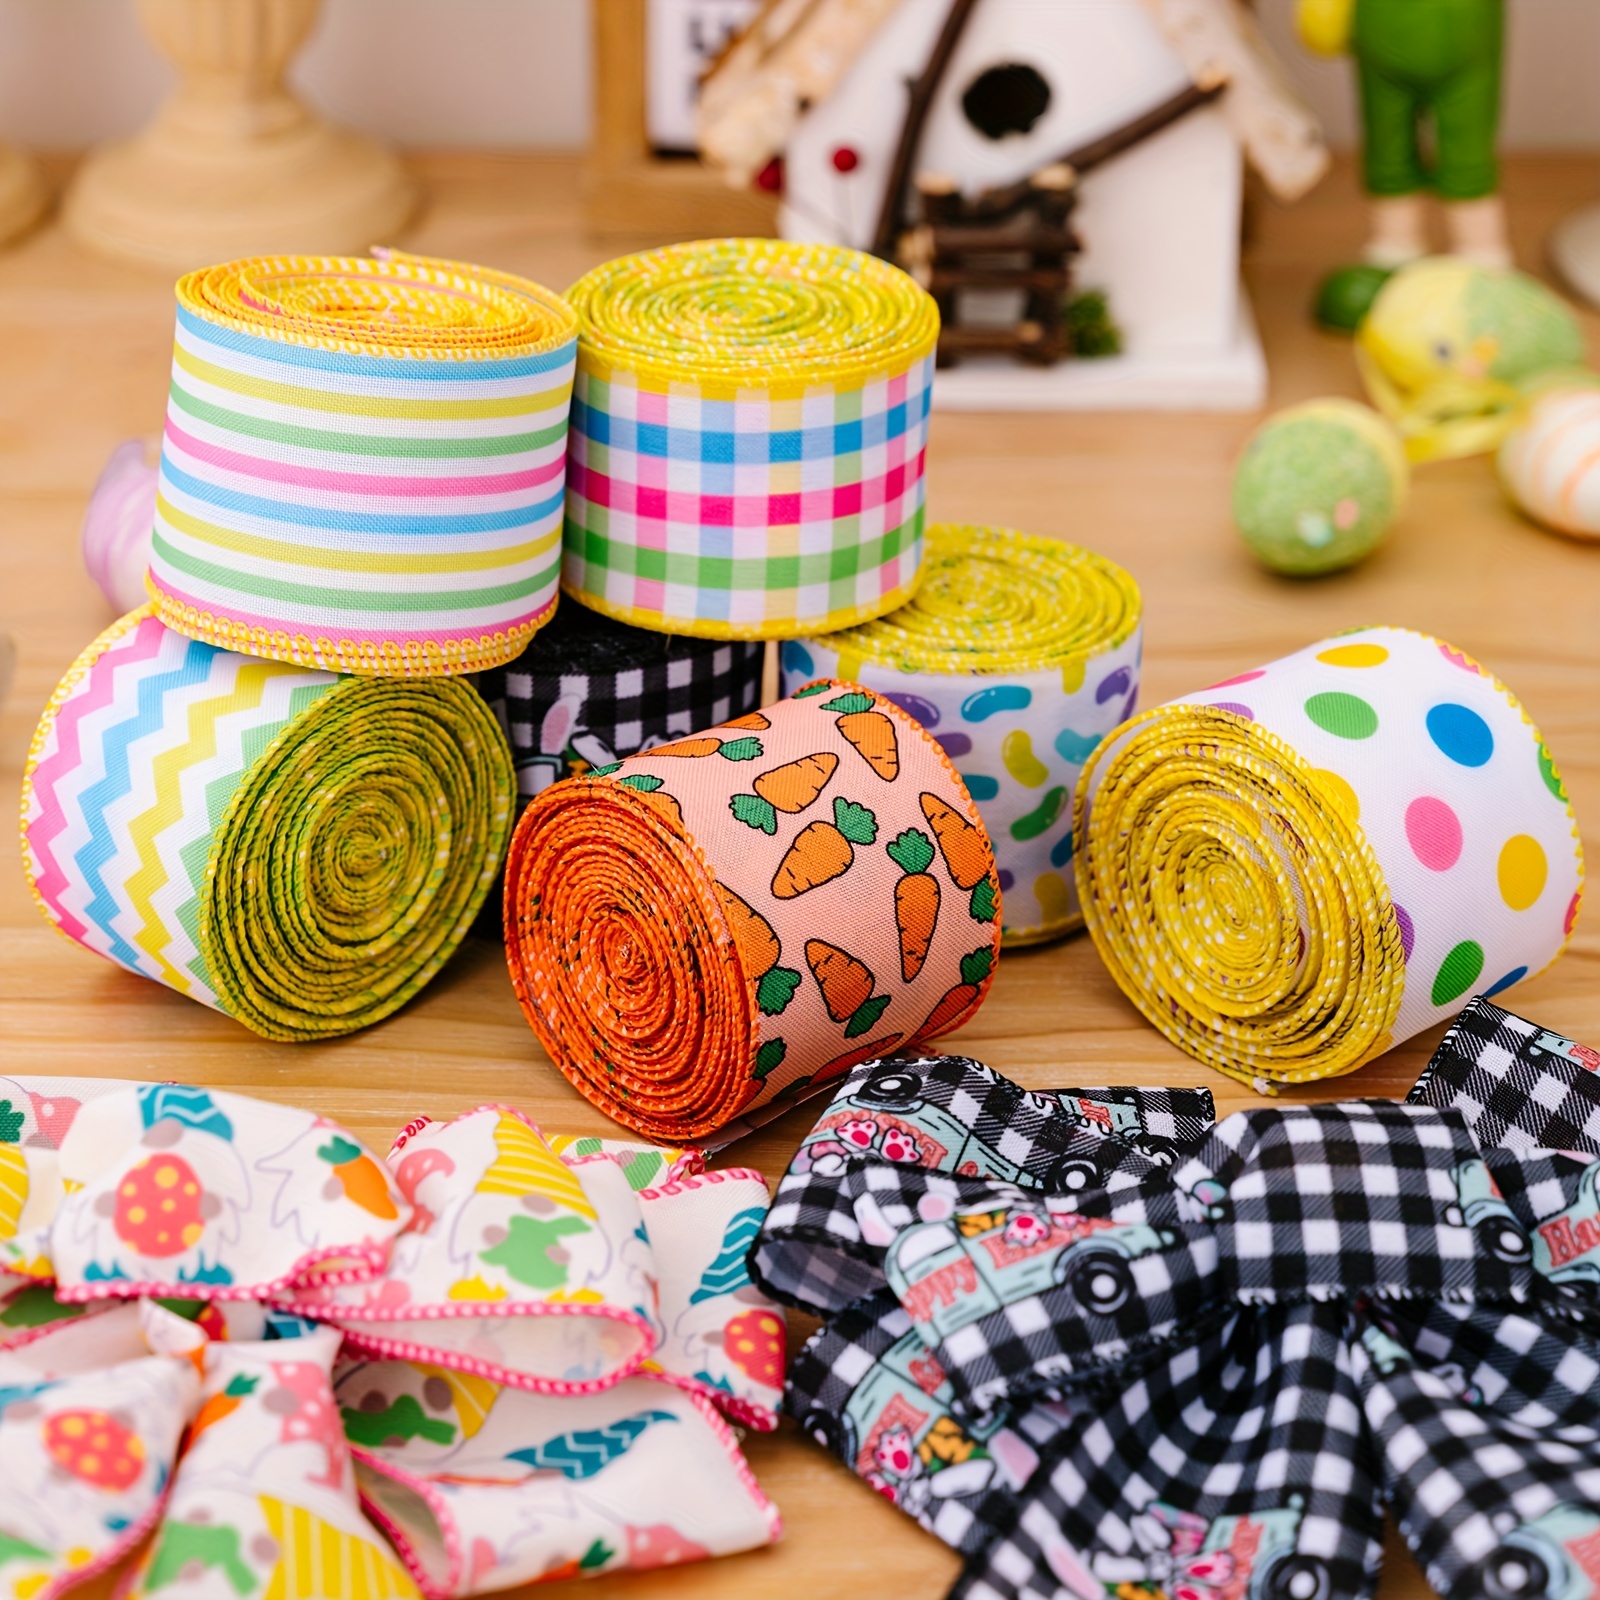 Easter Bunny Multi Color Wired Ribbon 4 x 10 YARD ROLL